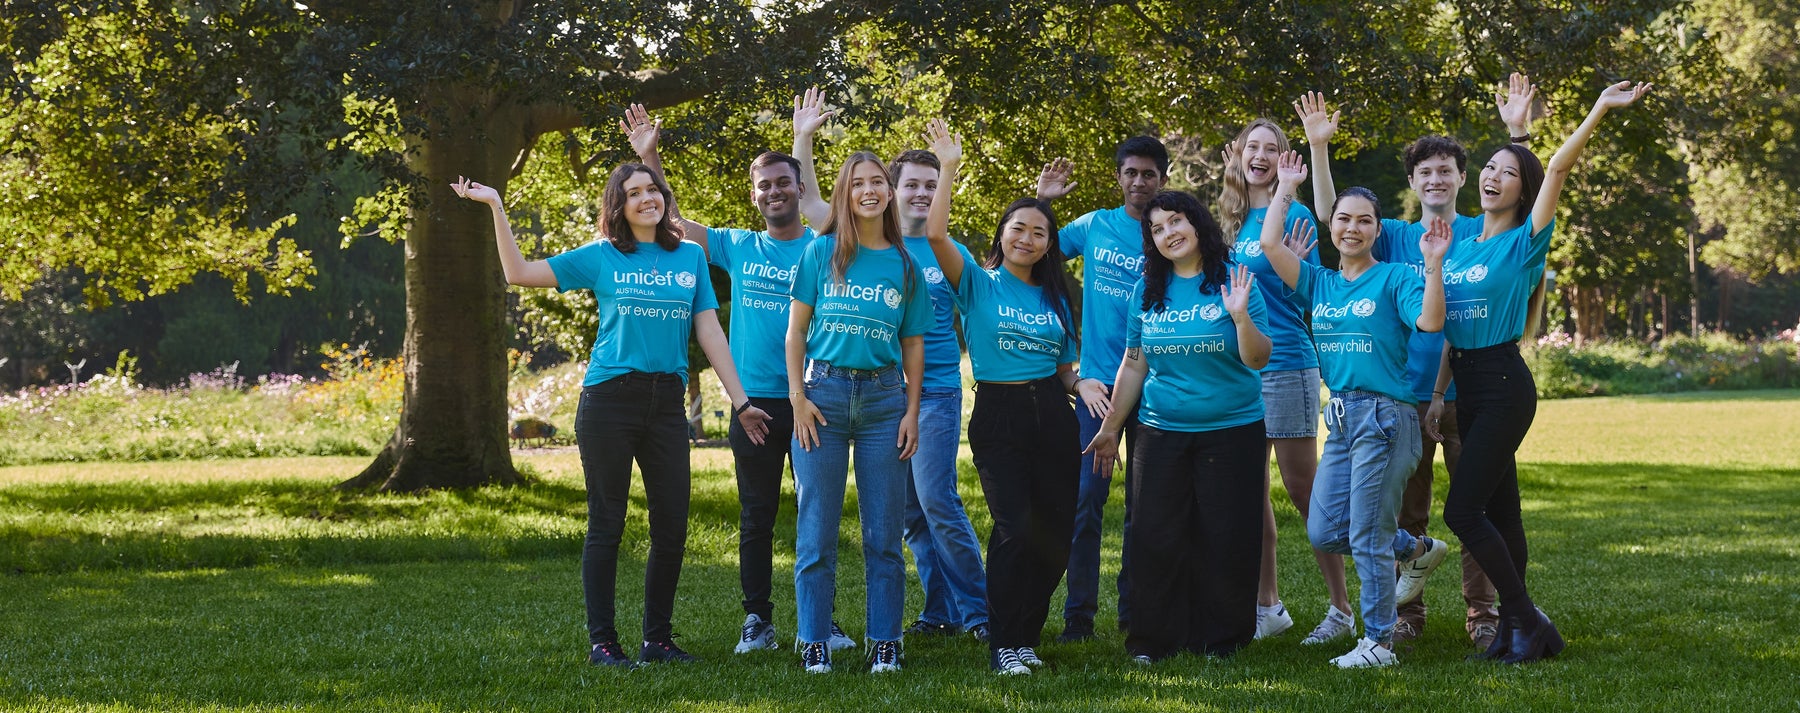 A group of 11 young people wearing UNICEF t-shirts and smiling to the camera.